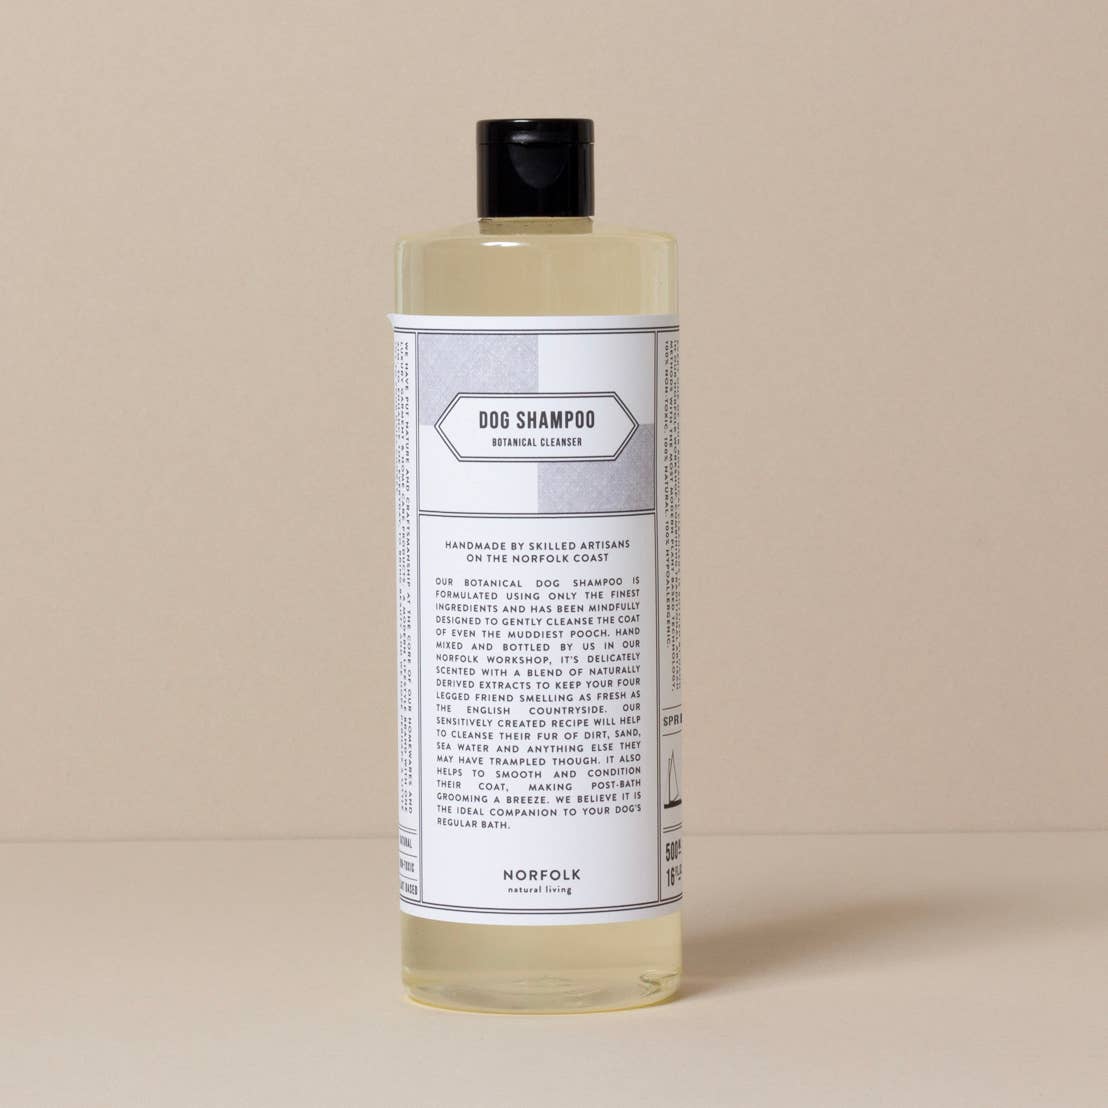 A bottle of Norfolk Natural Living Spring 91 Dog Shampoo labeled "dog shampoo fragrance-free with coconut oil" in a minimalist design against a beige background. The label is detailed with text about the product attributes.